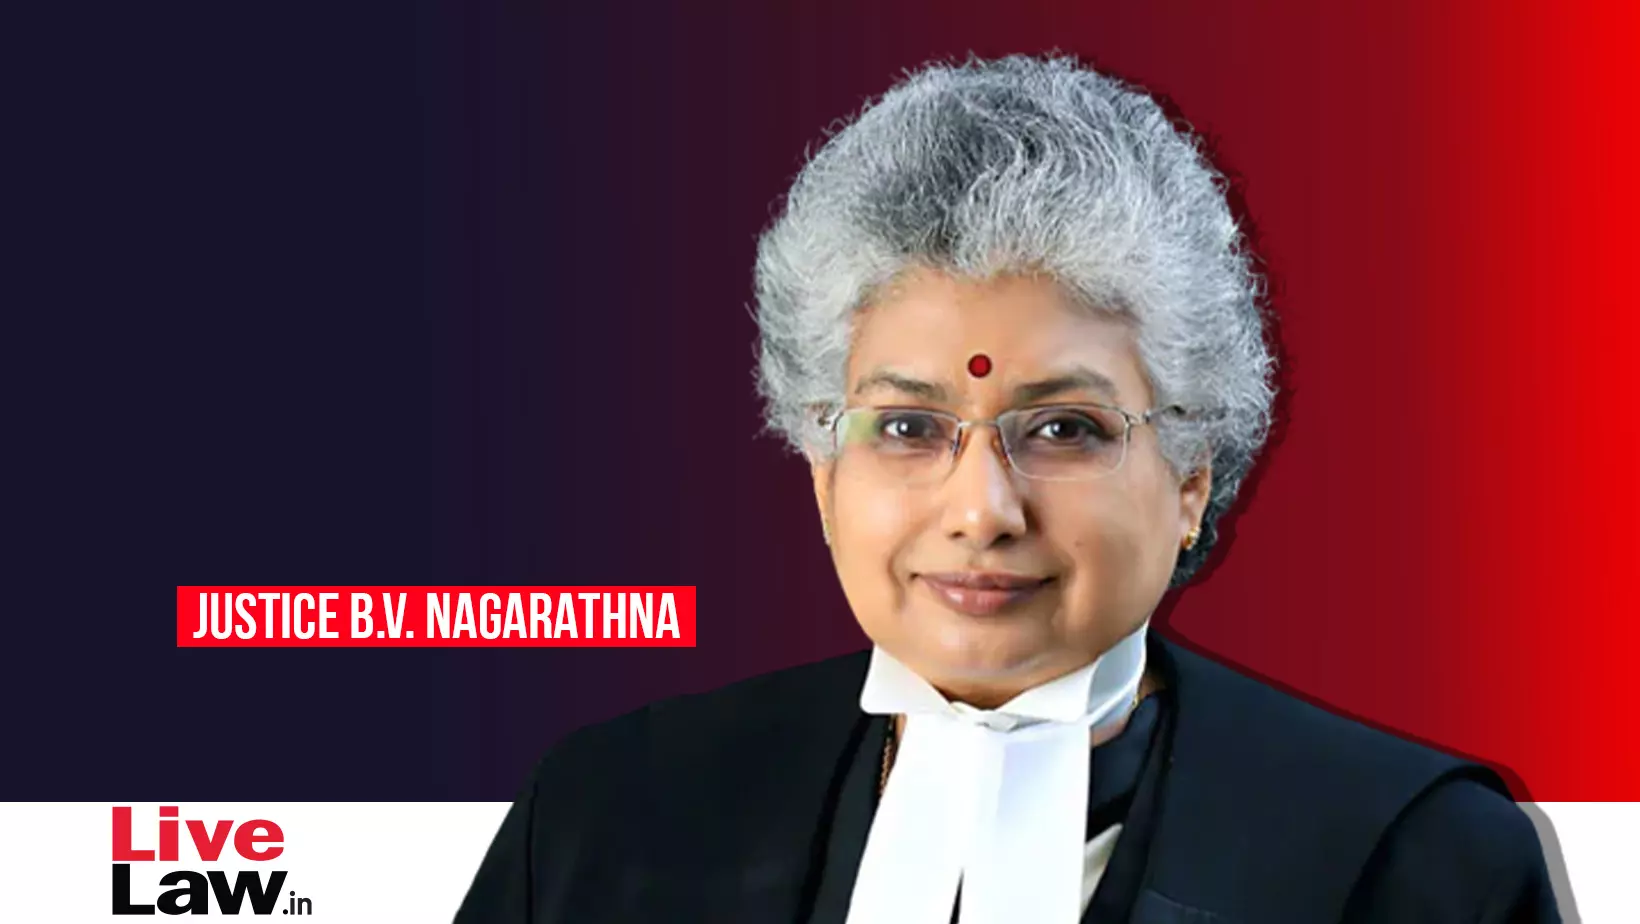 Women Do Not Want to Be Put On A Pedestal, We Only Want Equal Treatment: Justice BV Nagarathna